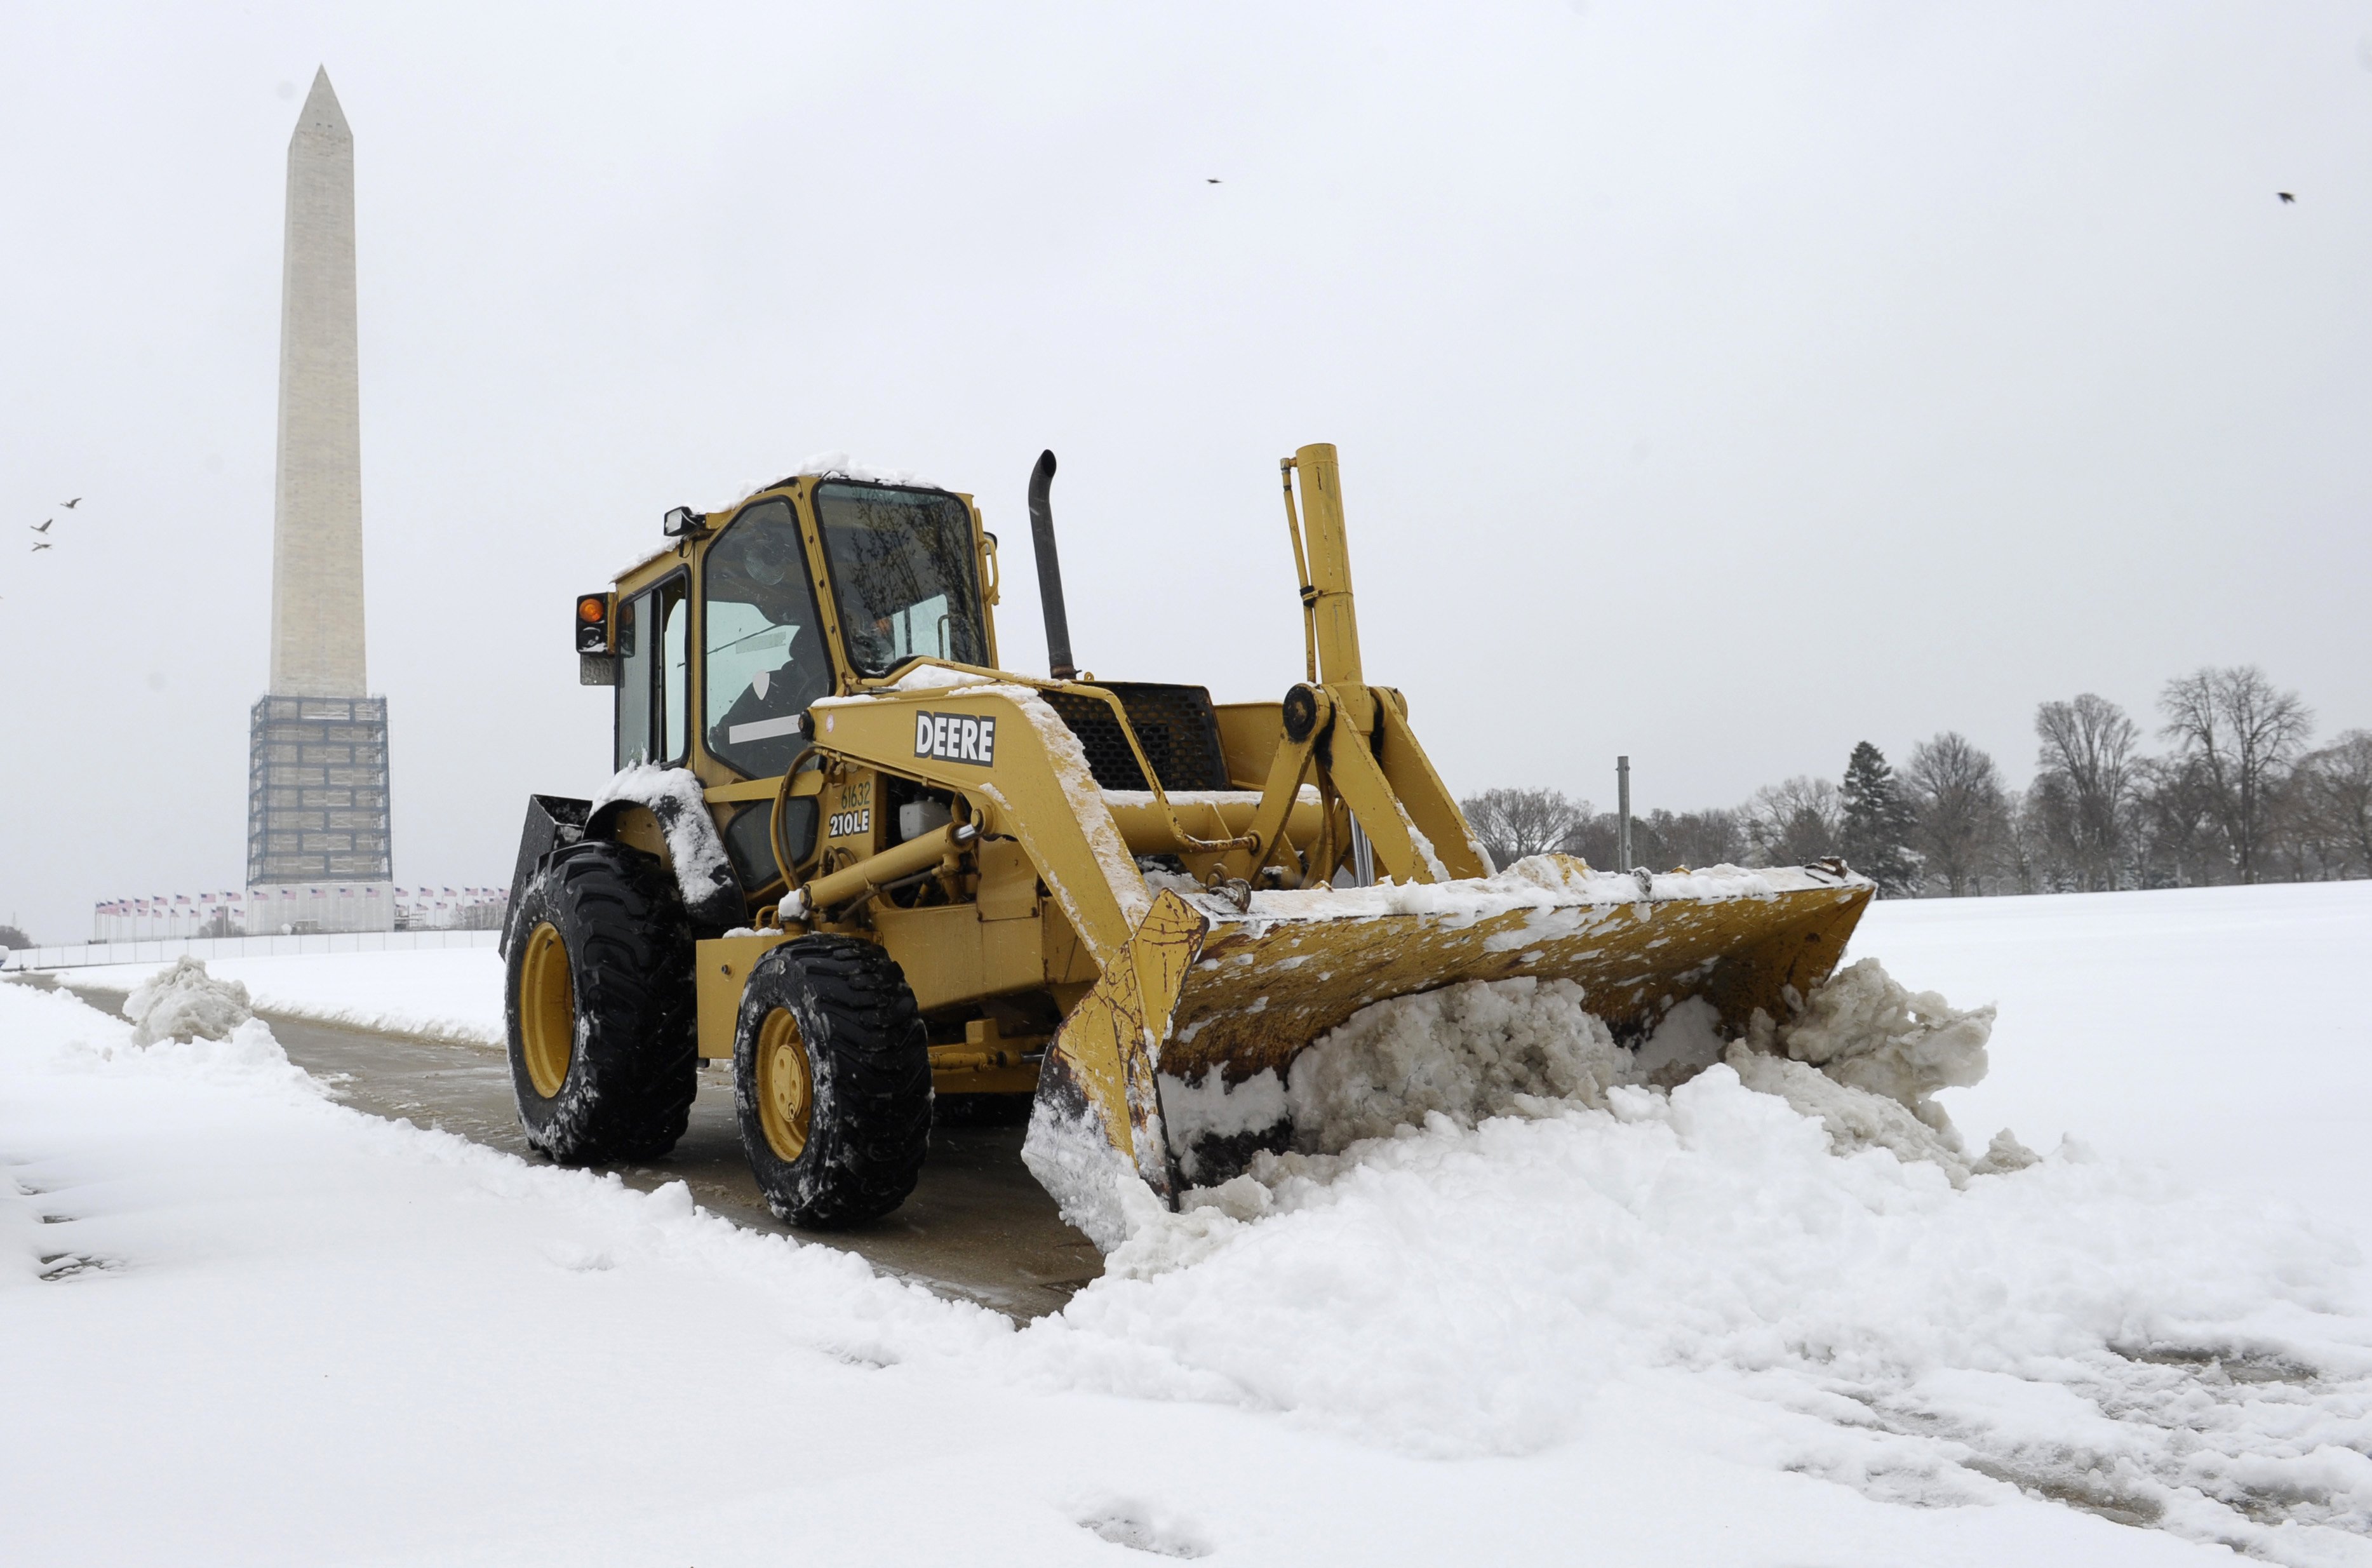 A snow plow clears the area around the Washington Monument in Washington, D.C. on March 17, 2014. (Susan Walsh—AP)